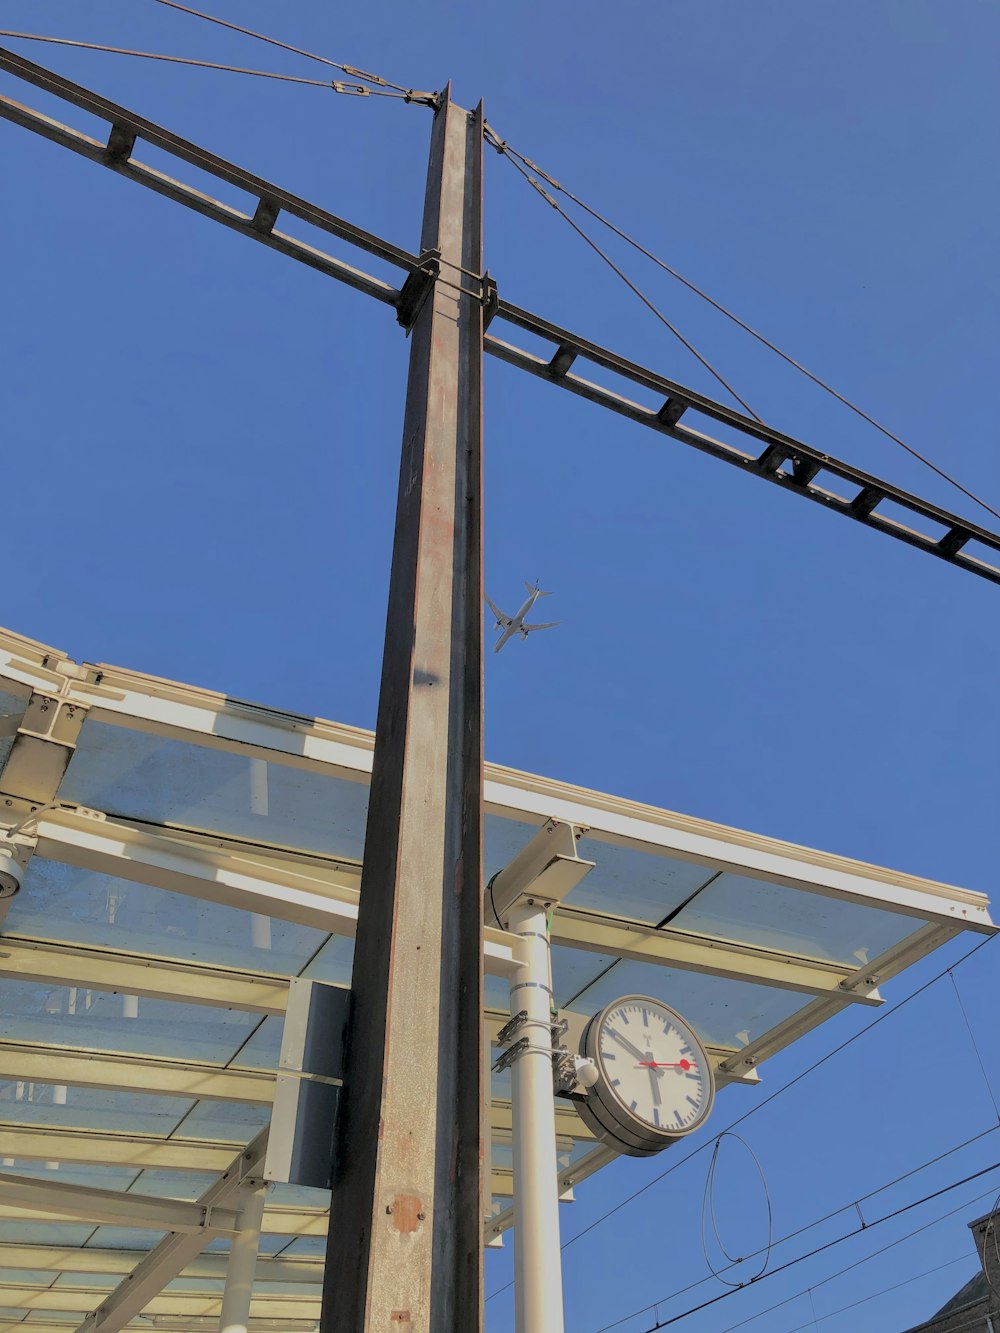 a clock on a pole next to a building